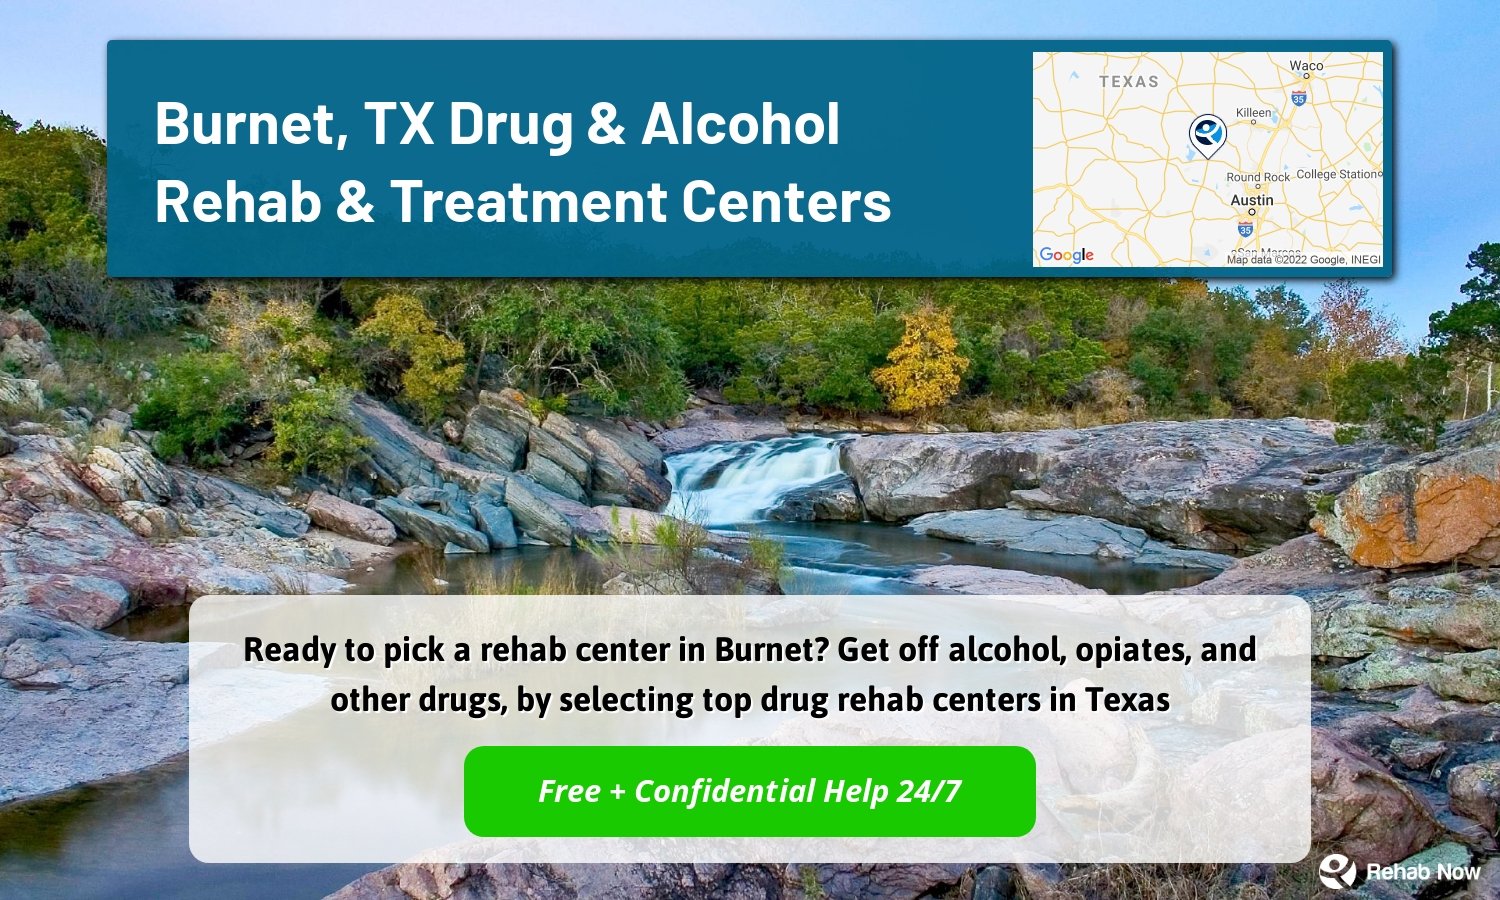 Ready to pick a rehab center in Burnet? Get off alcohol, opiates, and other drugs, by selecting top drug rehab centers in Texas